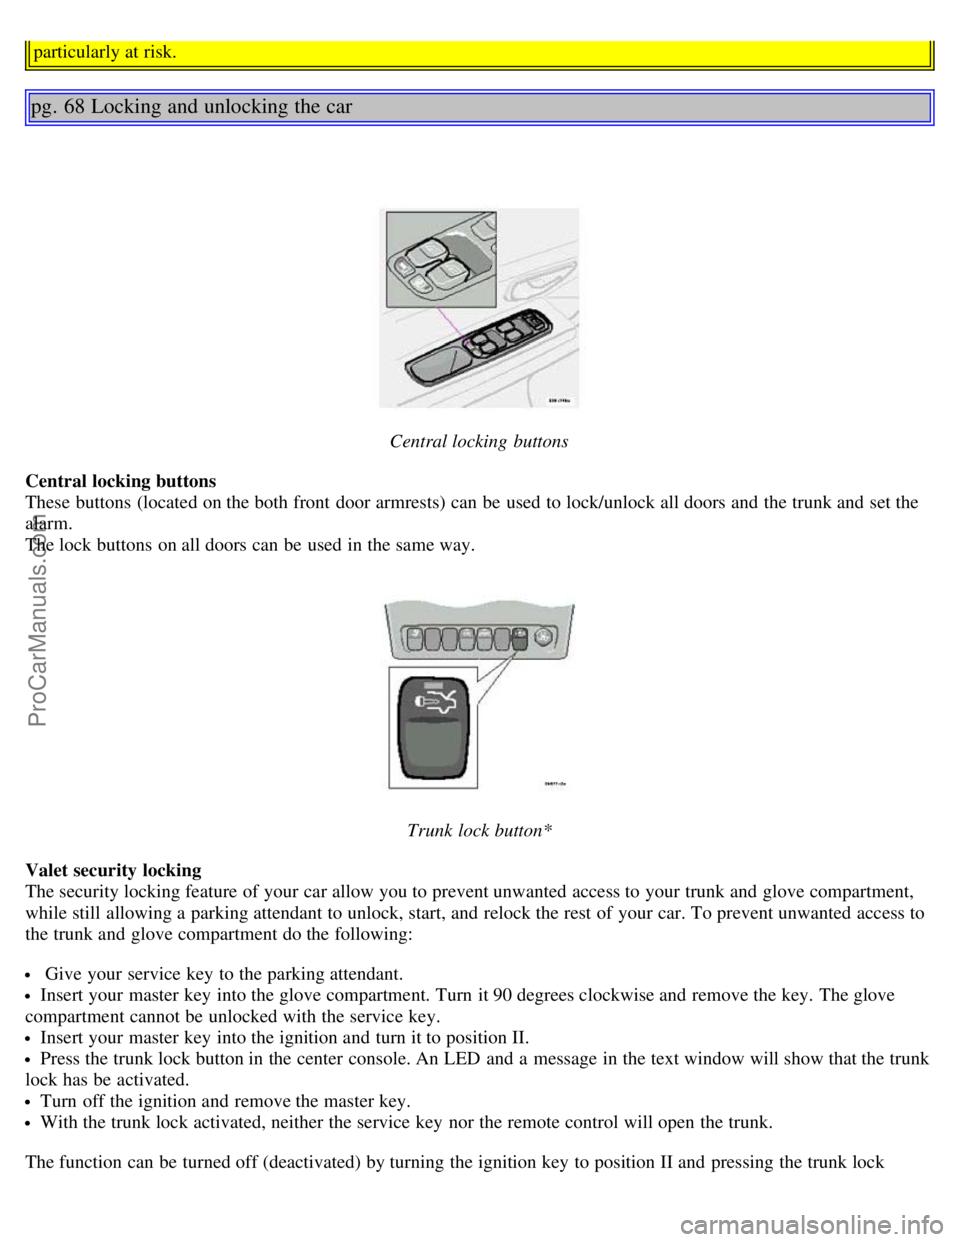 VOLVO S80 2006  Owners Manual particularly at risk.
pg. 68 Locking and unlocking the car
Central locking  buttons
Central locking buttons  
These buttons  (located on the both front  door armrests) can be  used to lock/unlock all 